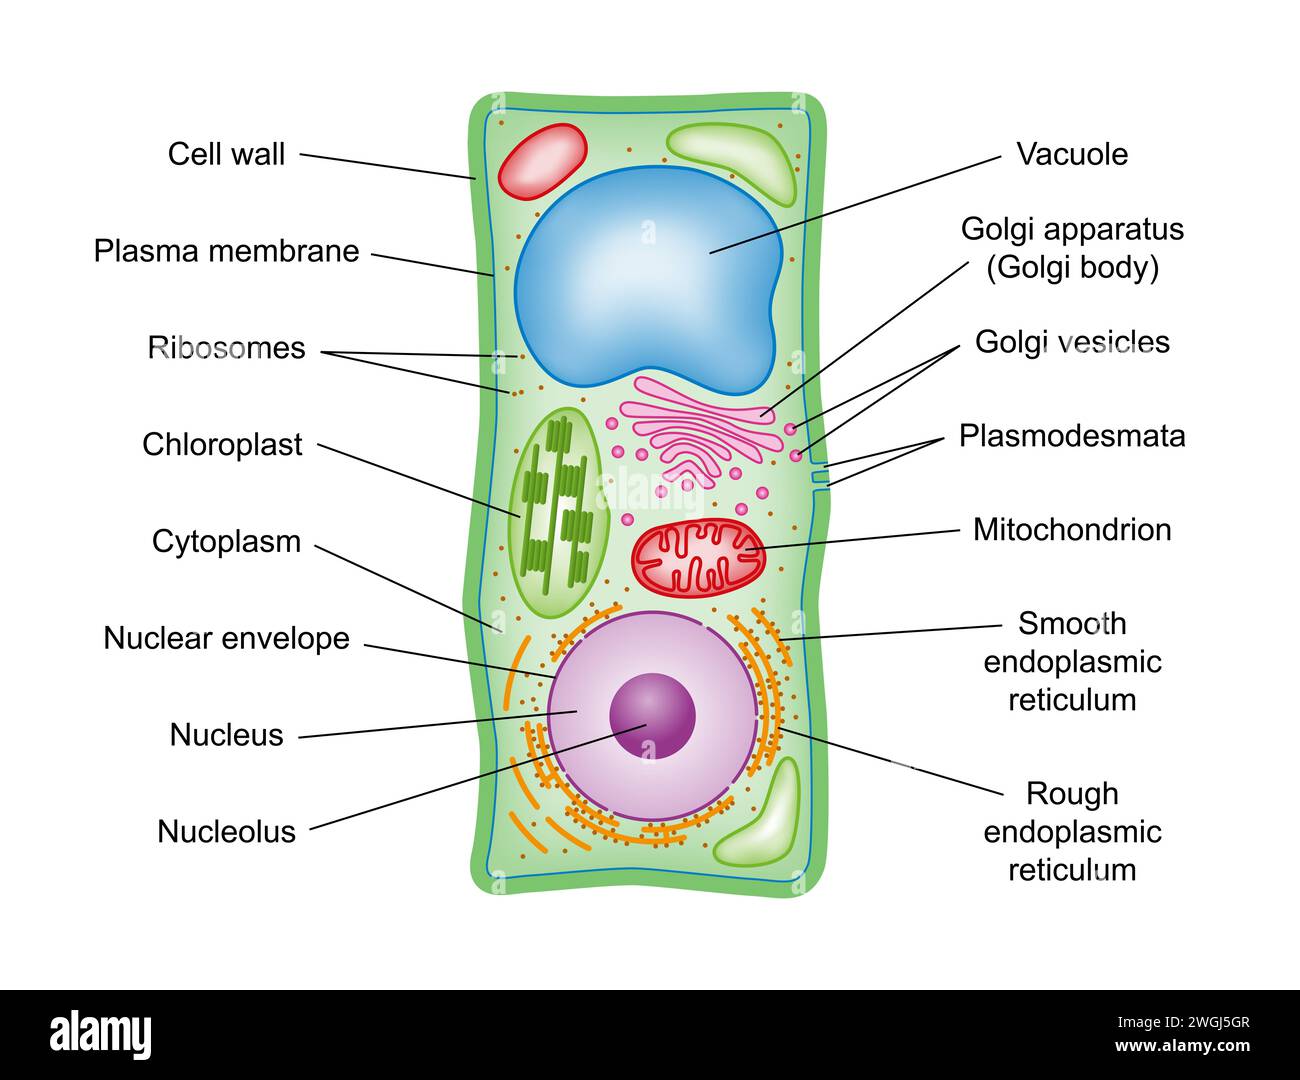 Plant cell structure, cross section, with legend. Schematic diagram of the components of plant cells, photosynthetic eukaryotes, with technical terms . Stock Photo